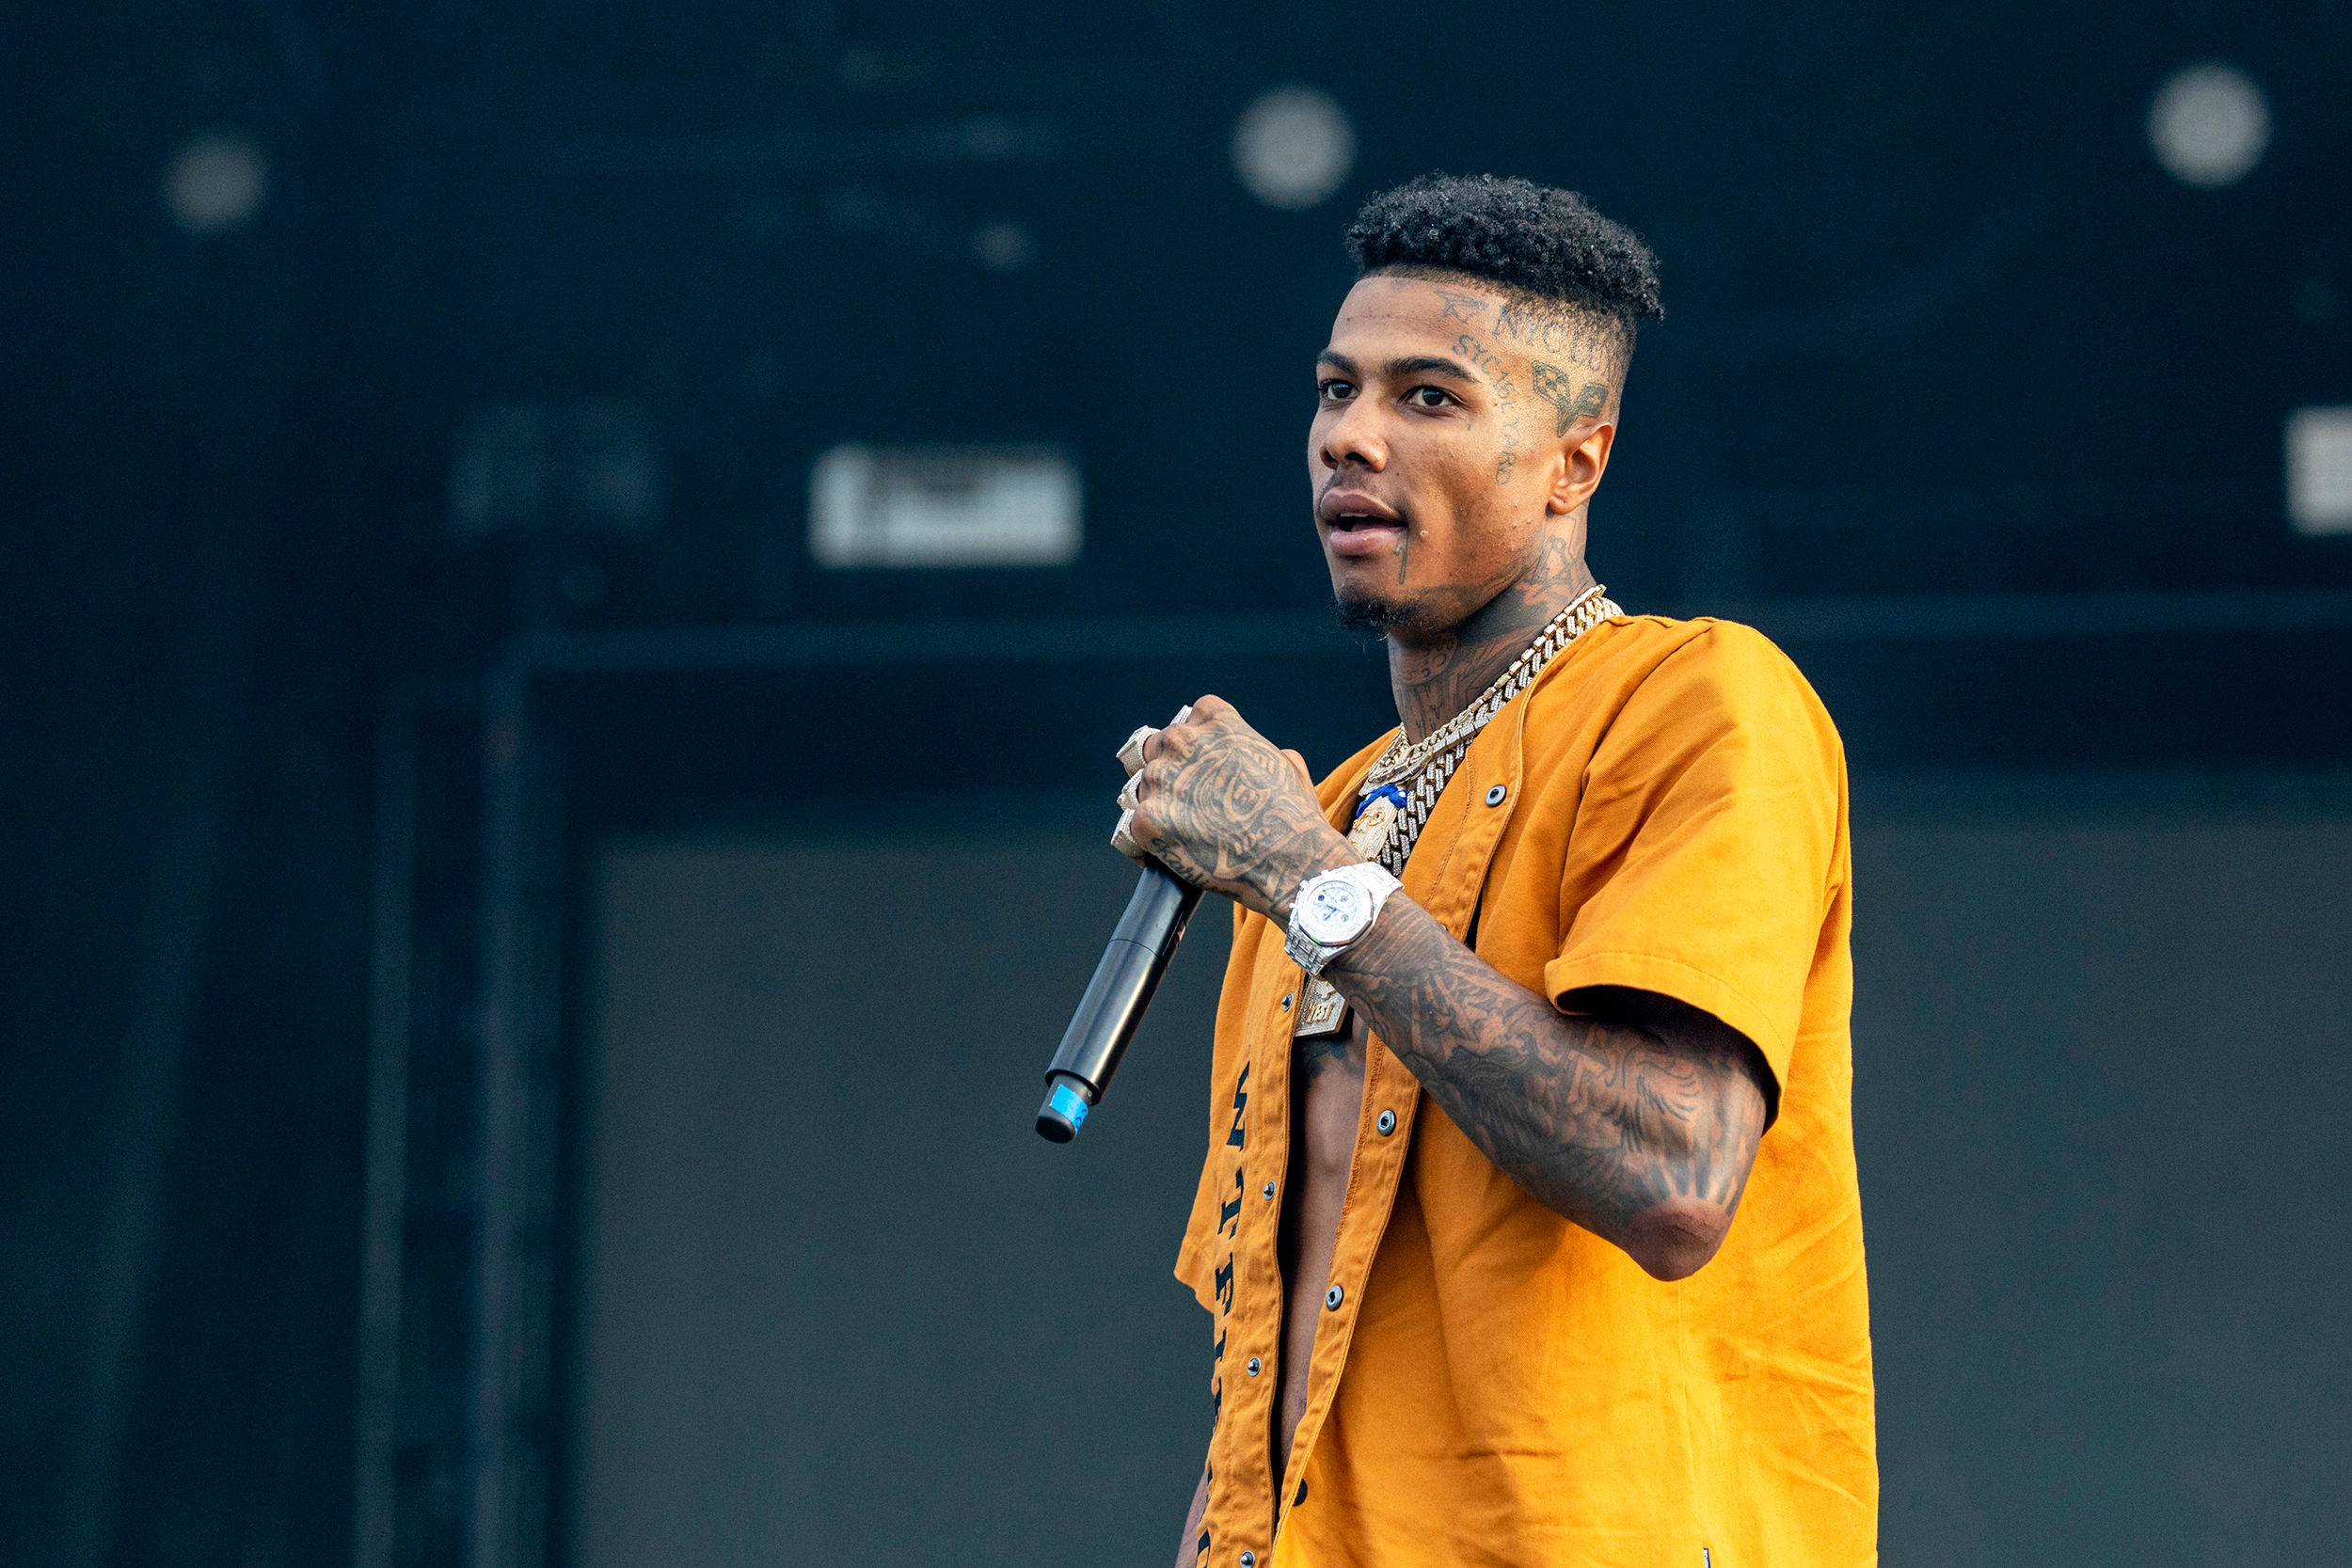 Video behind rapper Blueface’s arrest on attempted murder charges surfaces: Watch